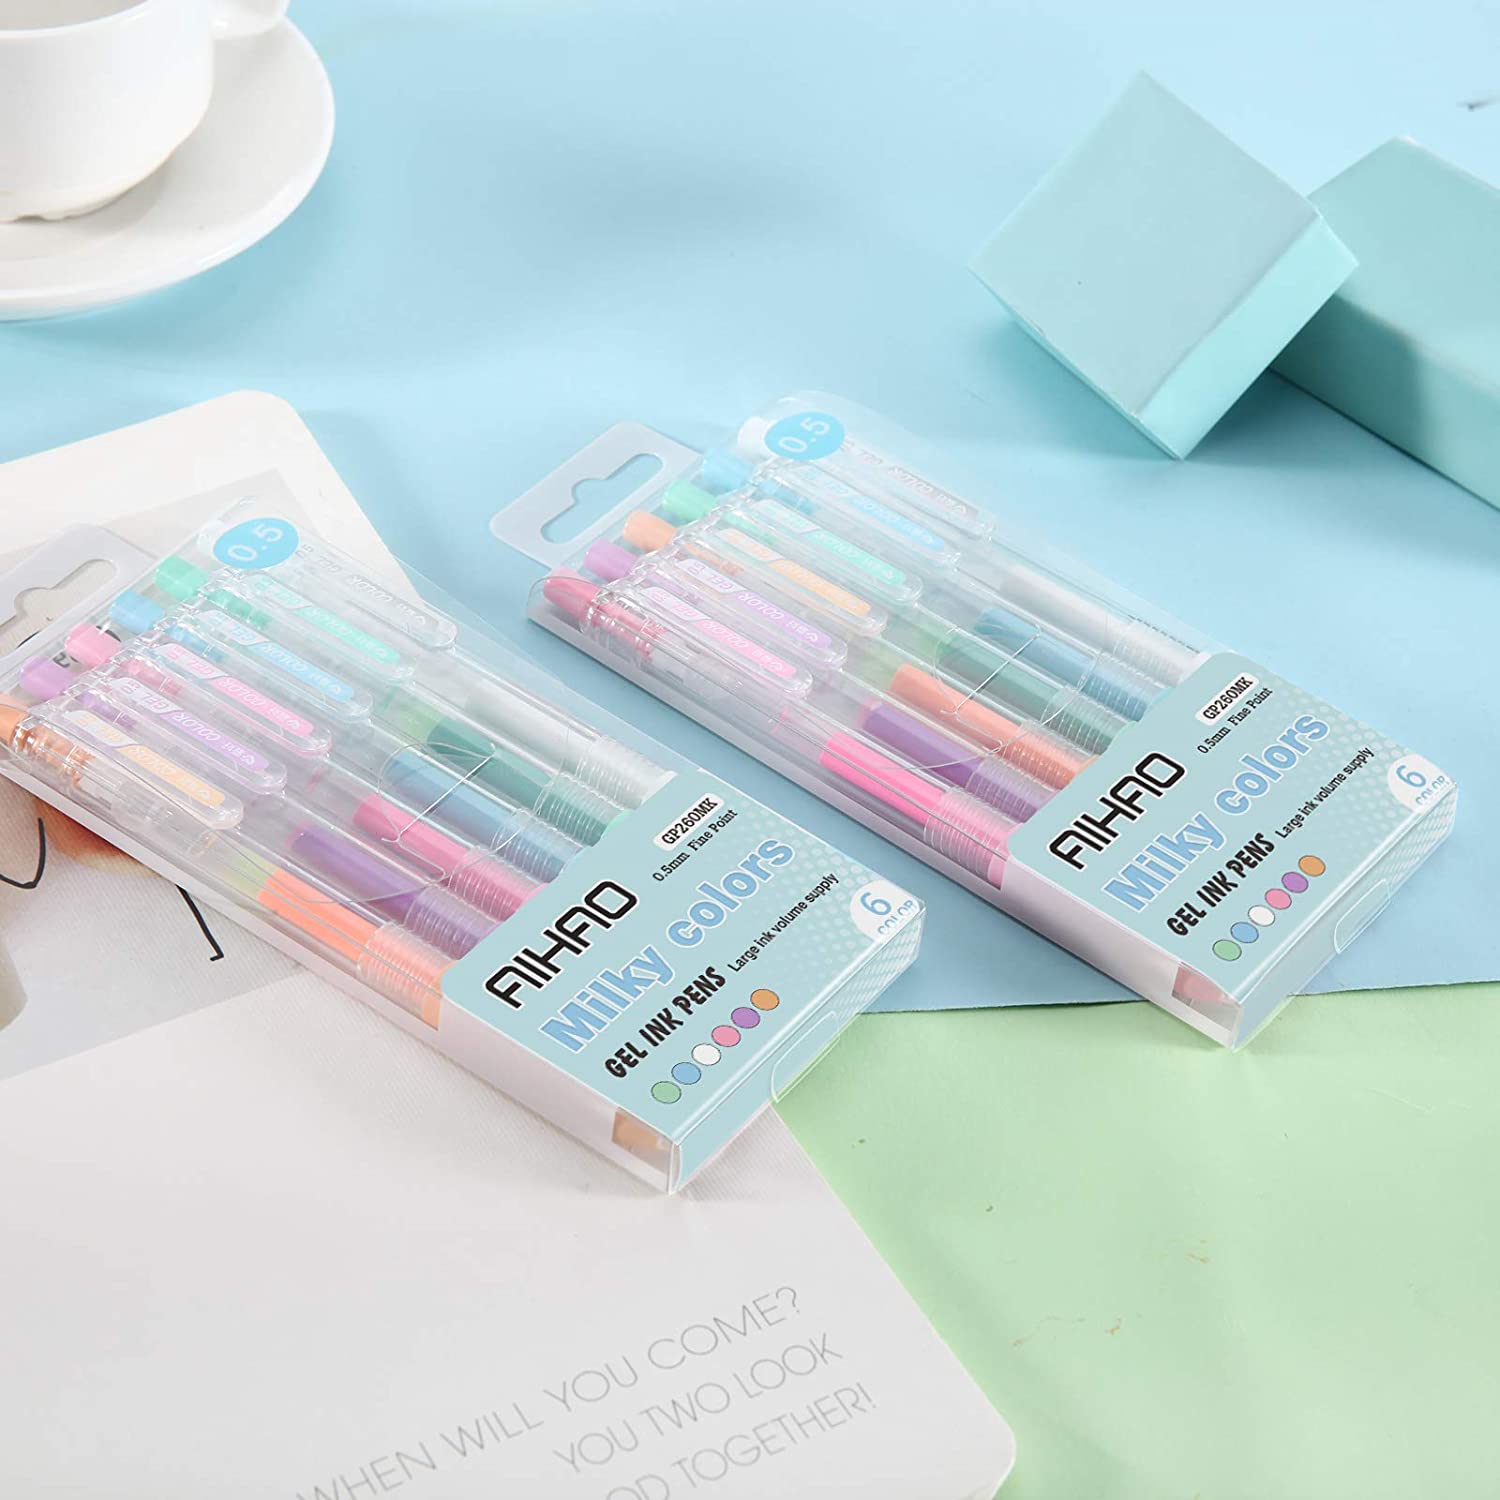 AIHAO Milky Gel Pens, Fine Point, Color Pen for Journaling, Drawing, Adult Coloring, Note Taking, 6 Pack, 0.5mm